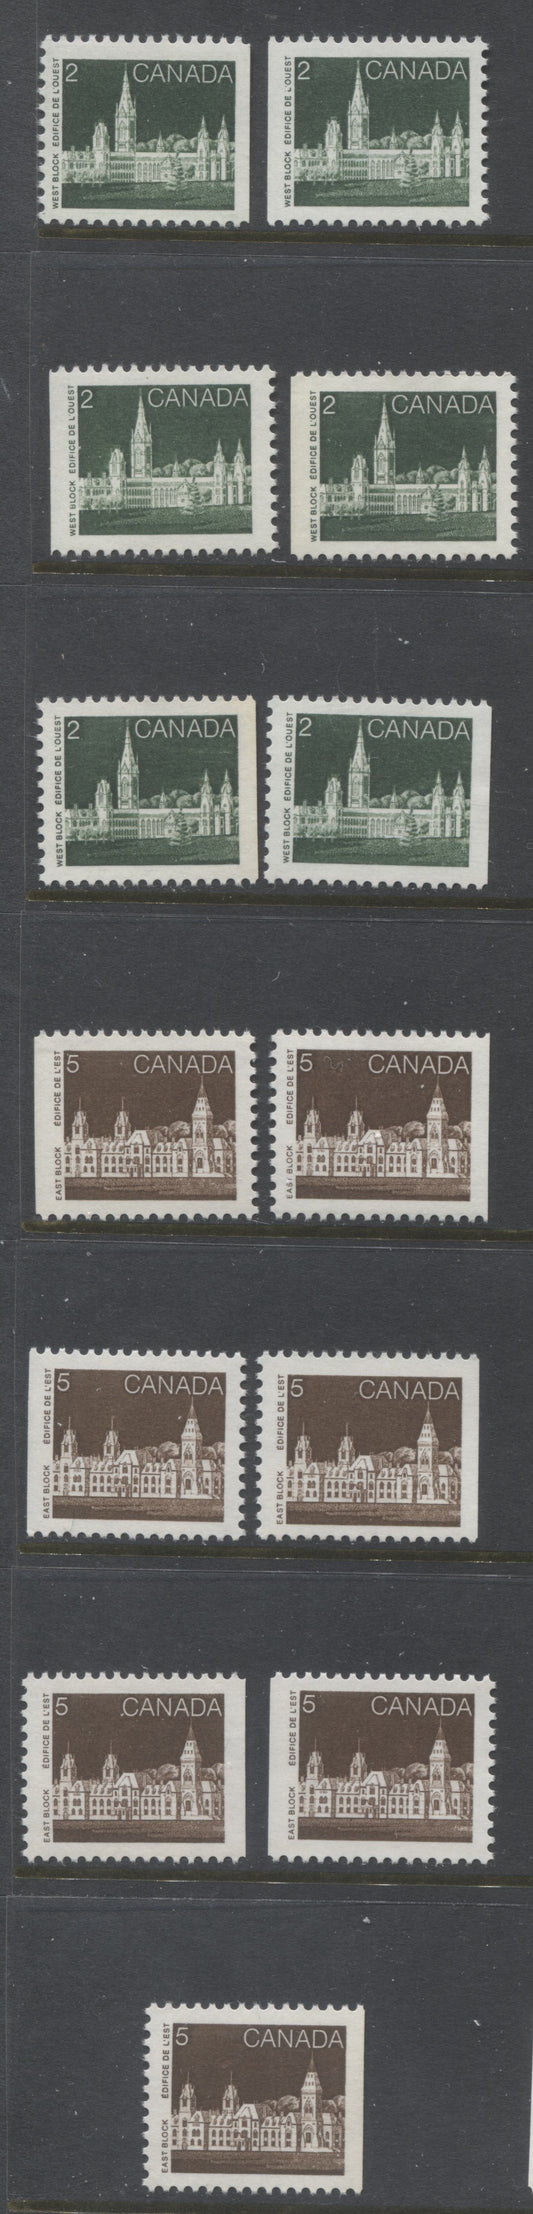 Lot 376 Canada #939, 939i, 941, 941ii 2c. 5c Deep Green & Deep Brown Parliament Buildings, 1982-1987 Artifacts & National Parks Issue, 13 VFNH Booklet Singles,NF/NF to MF, Abitibi Papers